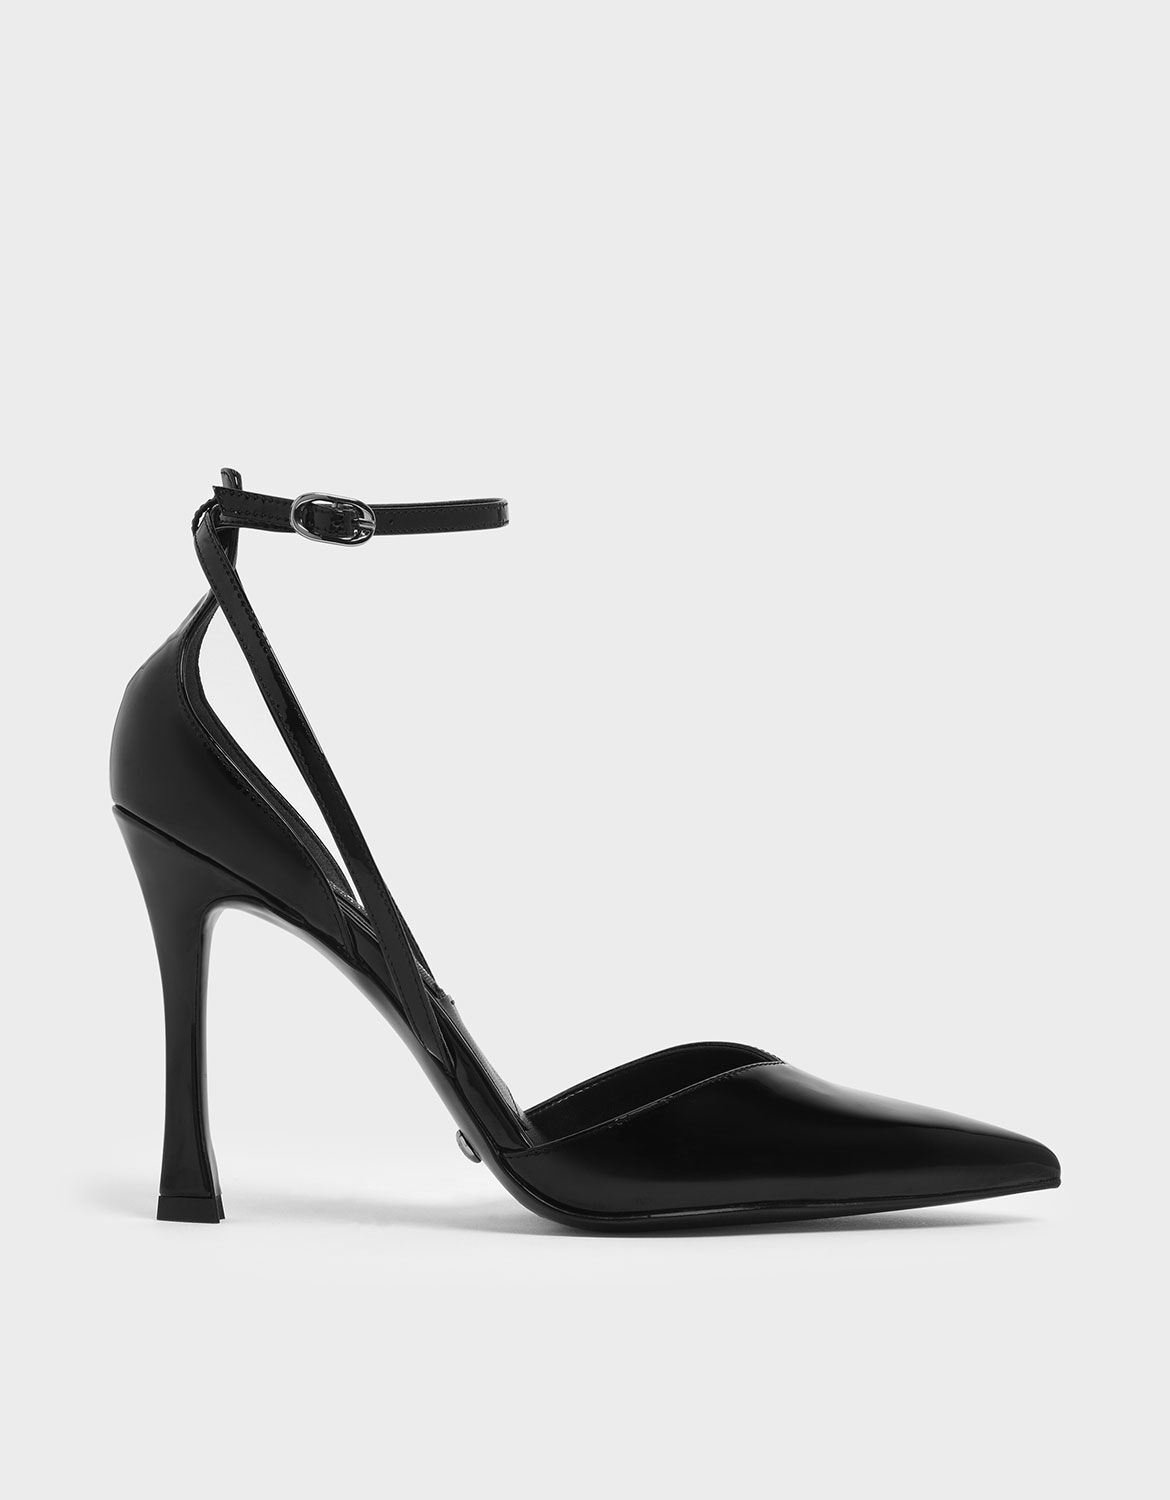 black patent leather ankle strap heels